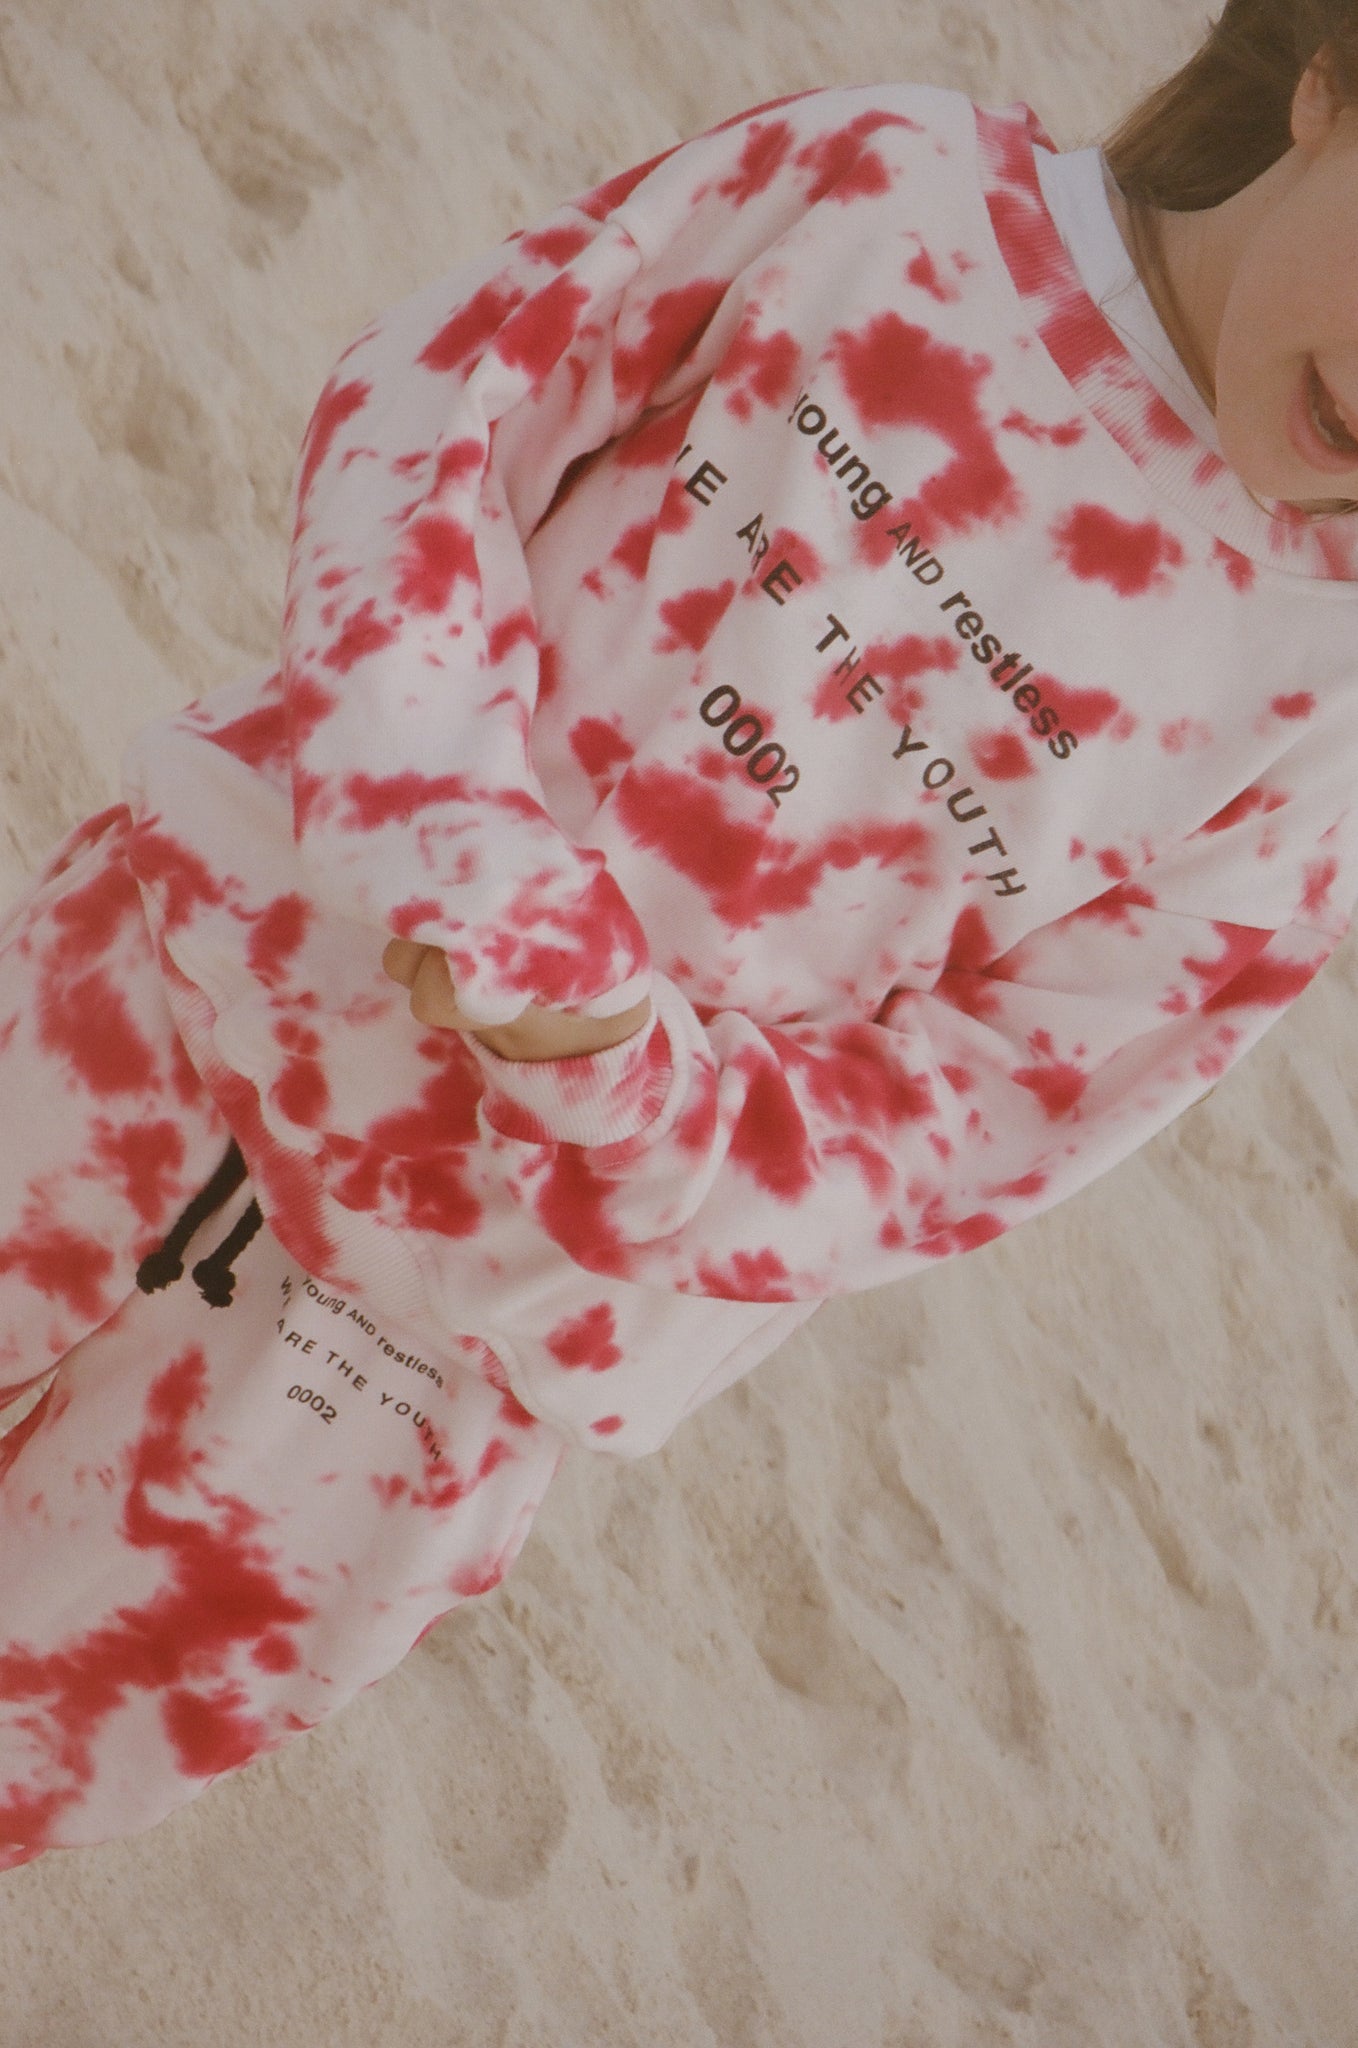 LEISURE FOREVER SWEATER / RED TIE DYE